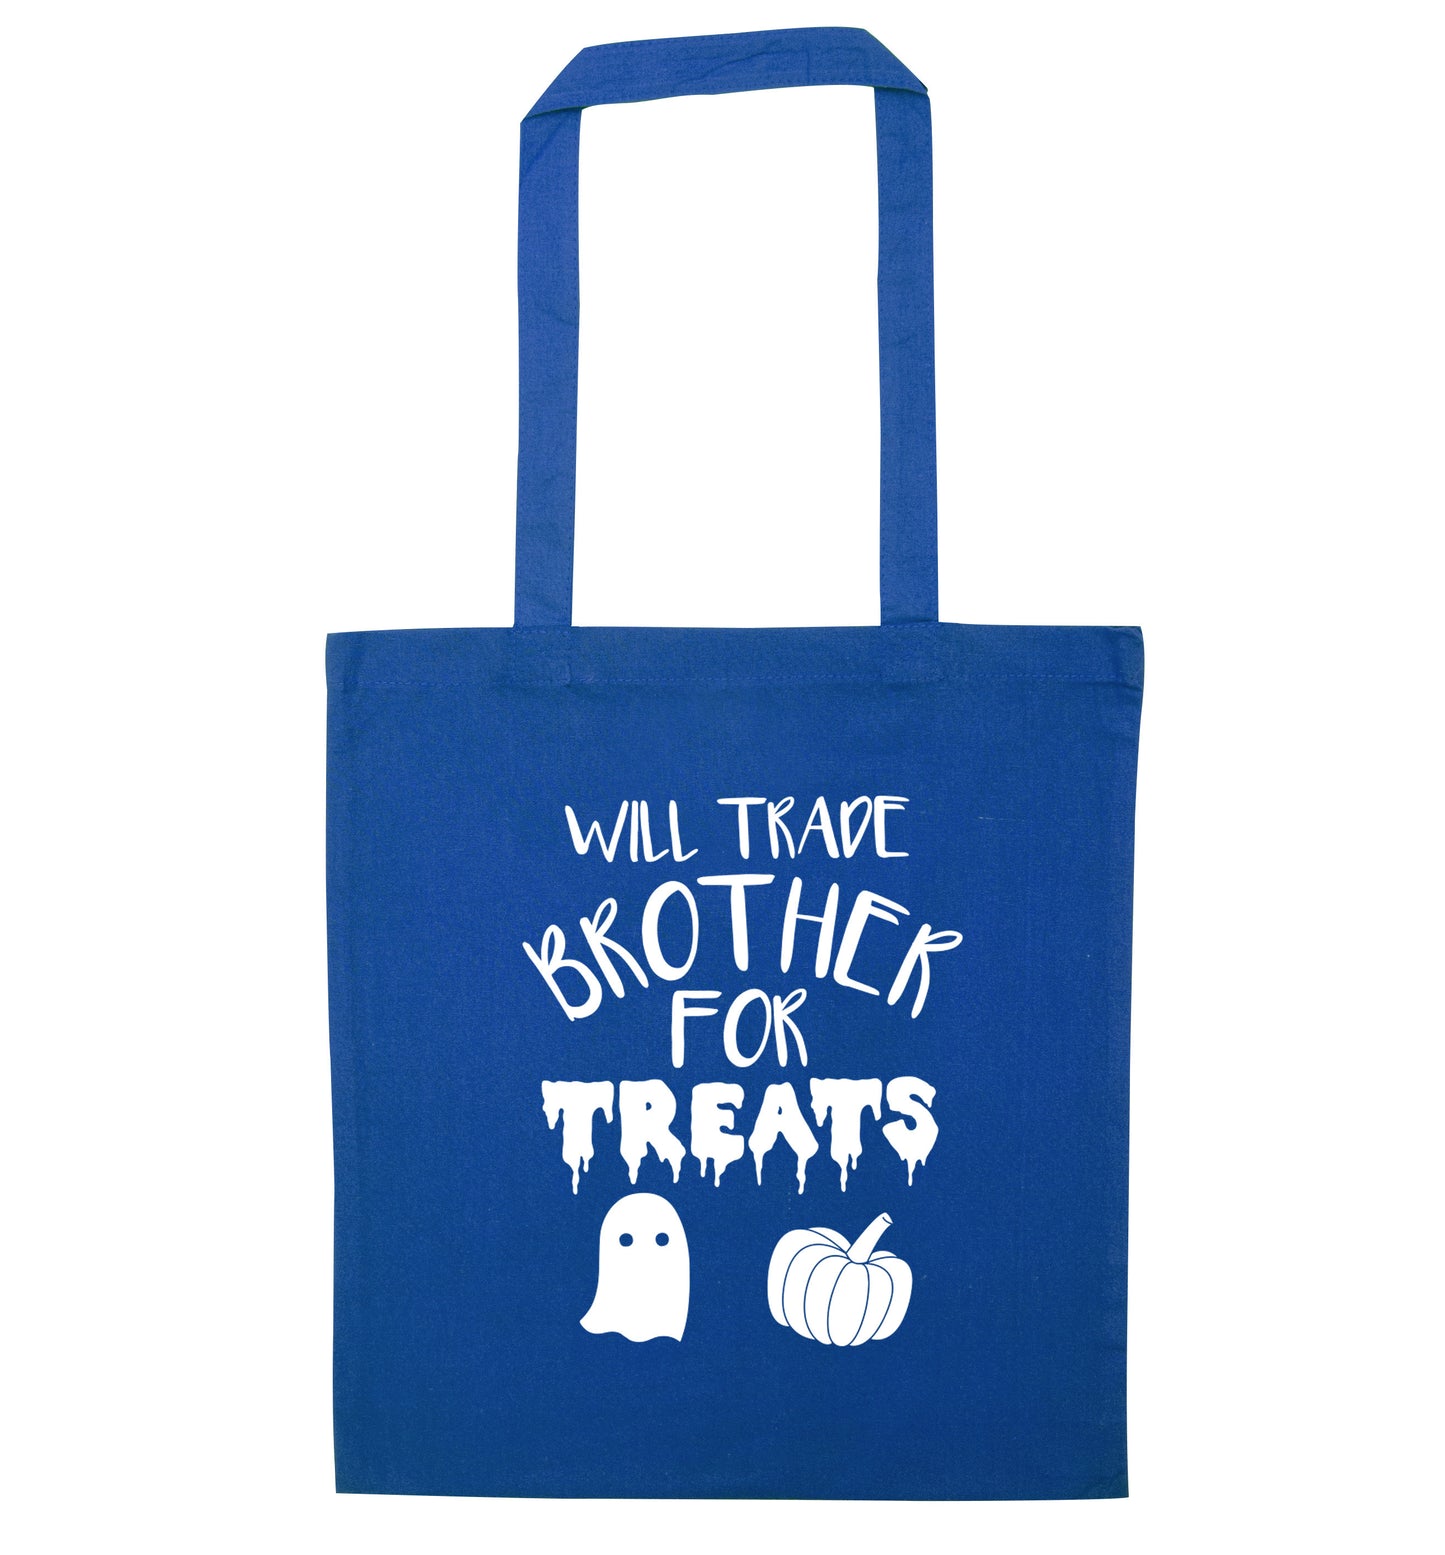 Will trade brother for treats blue tote bag